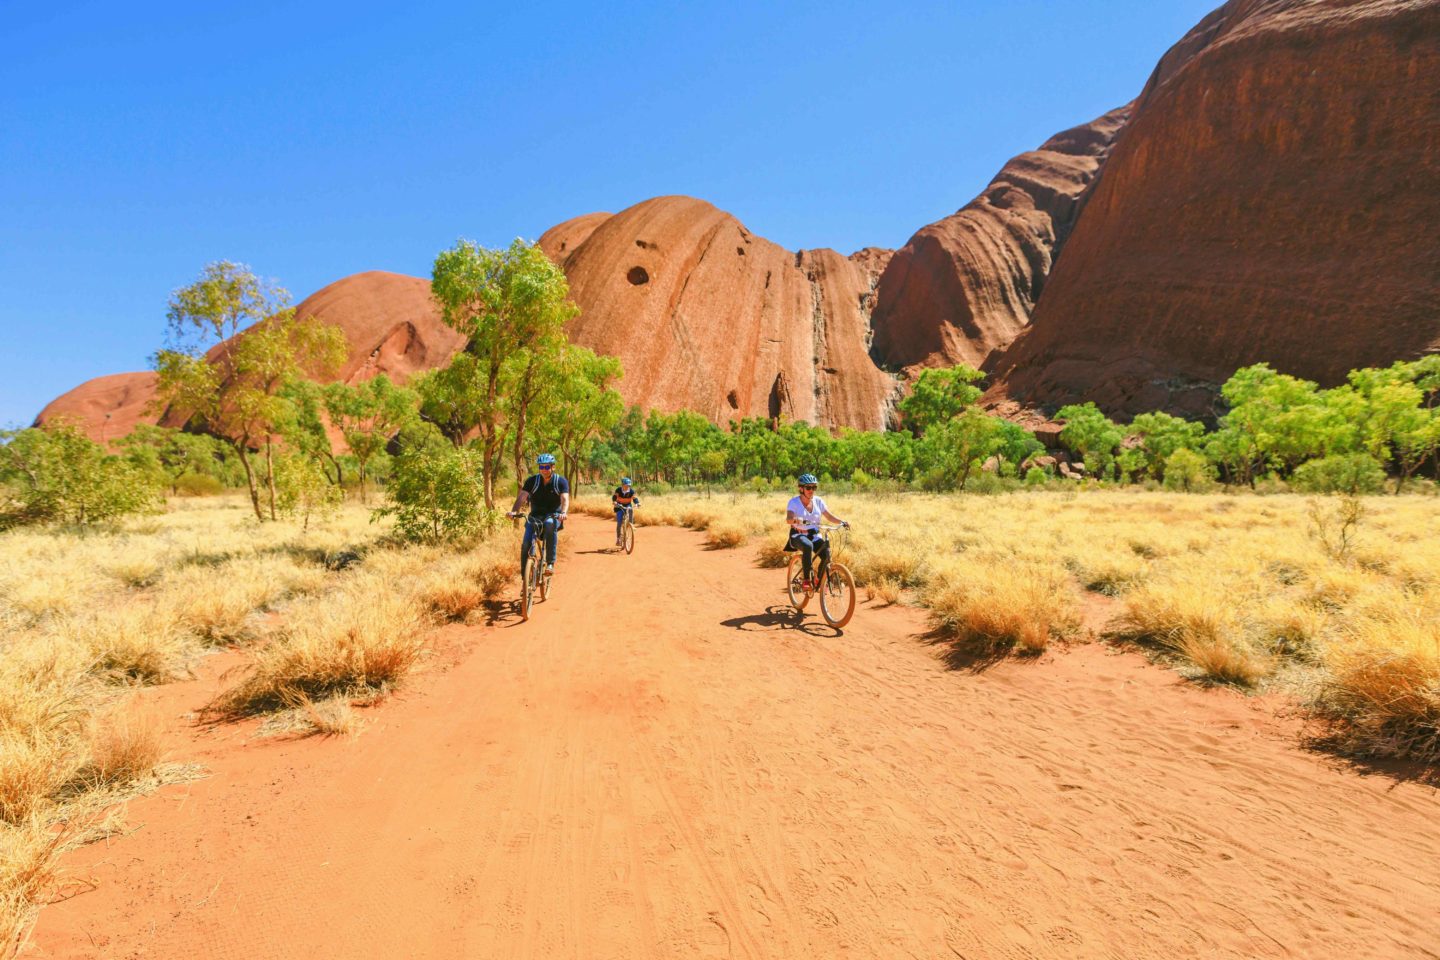 A group of cyclists on a dirt path with red rock in background.